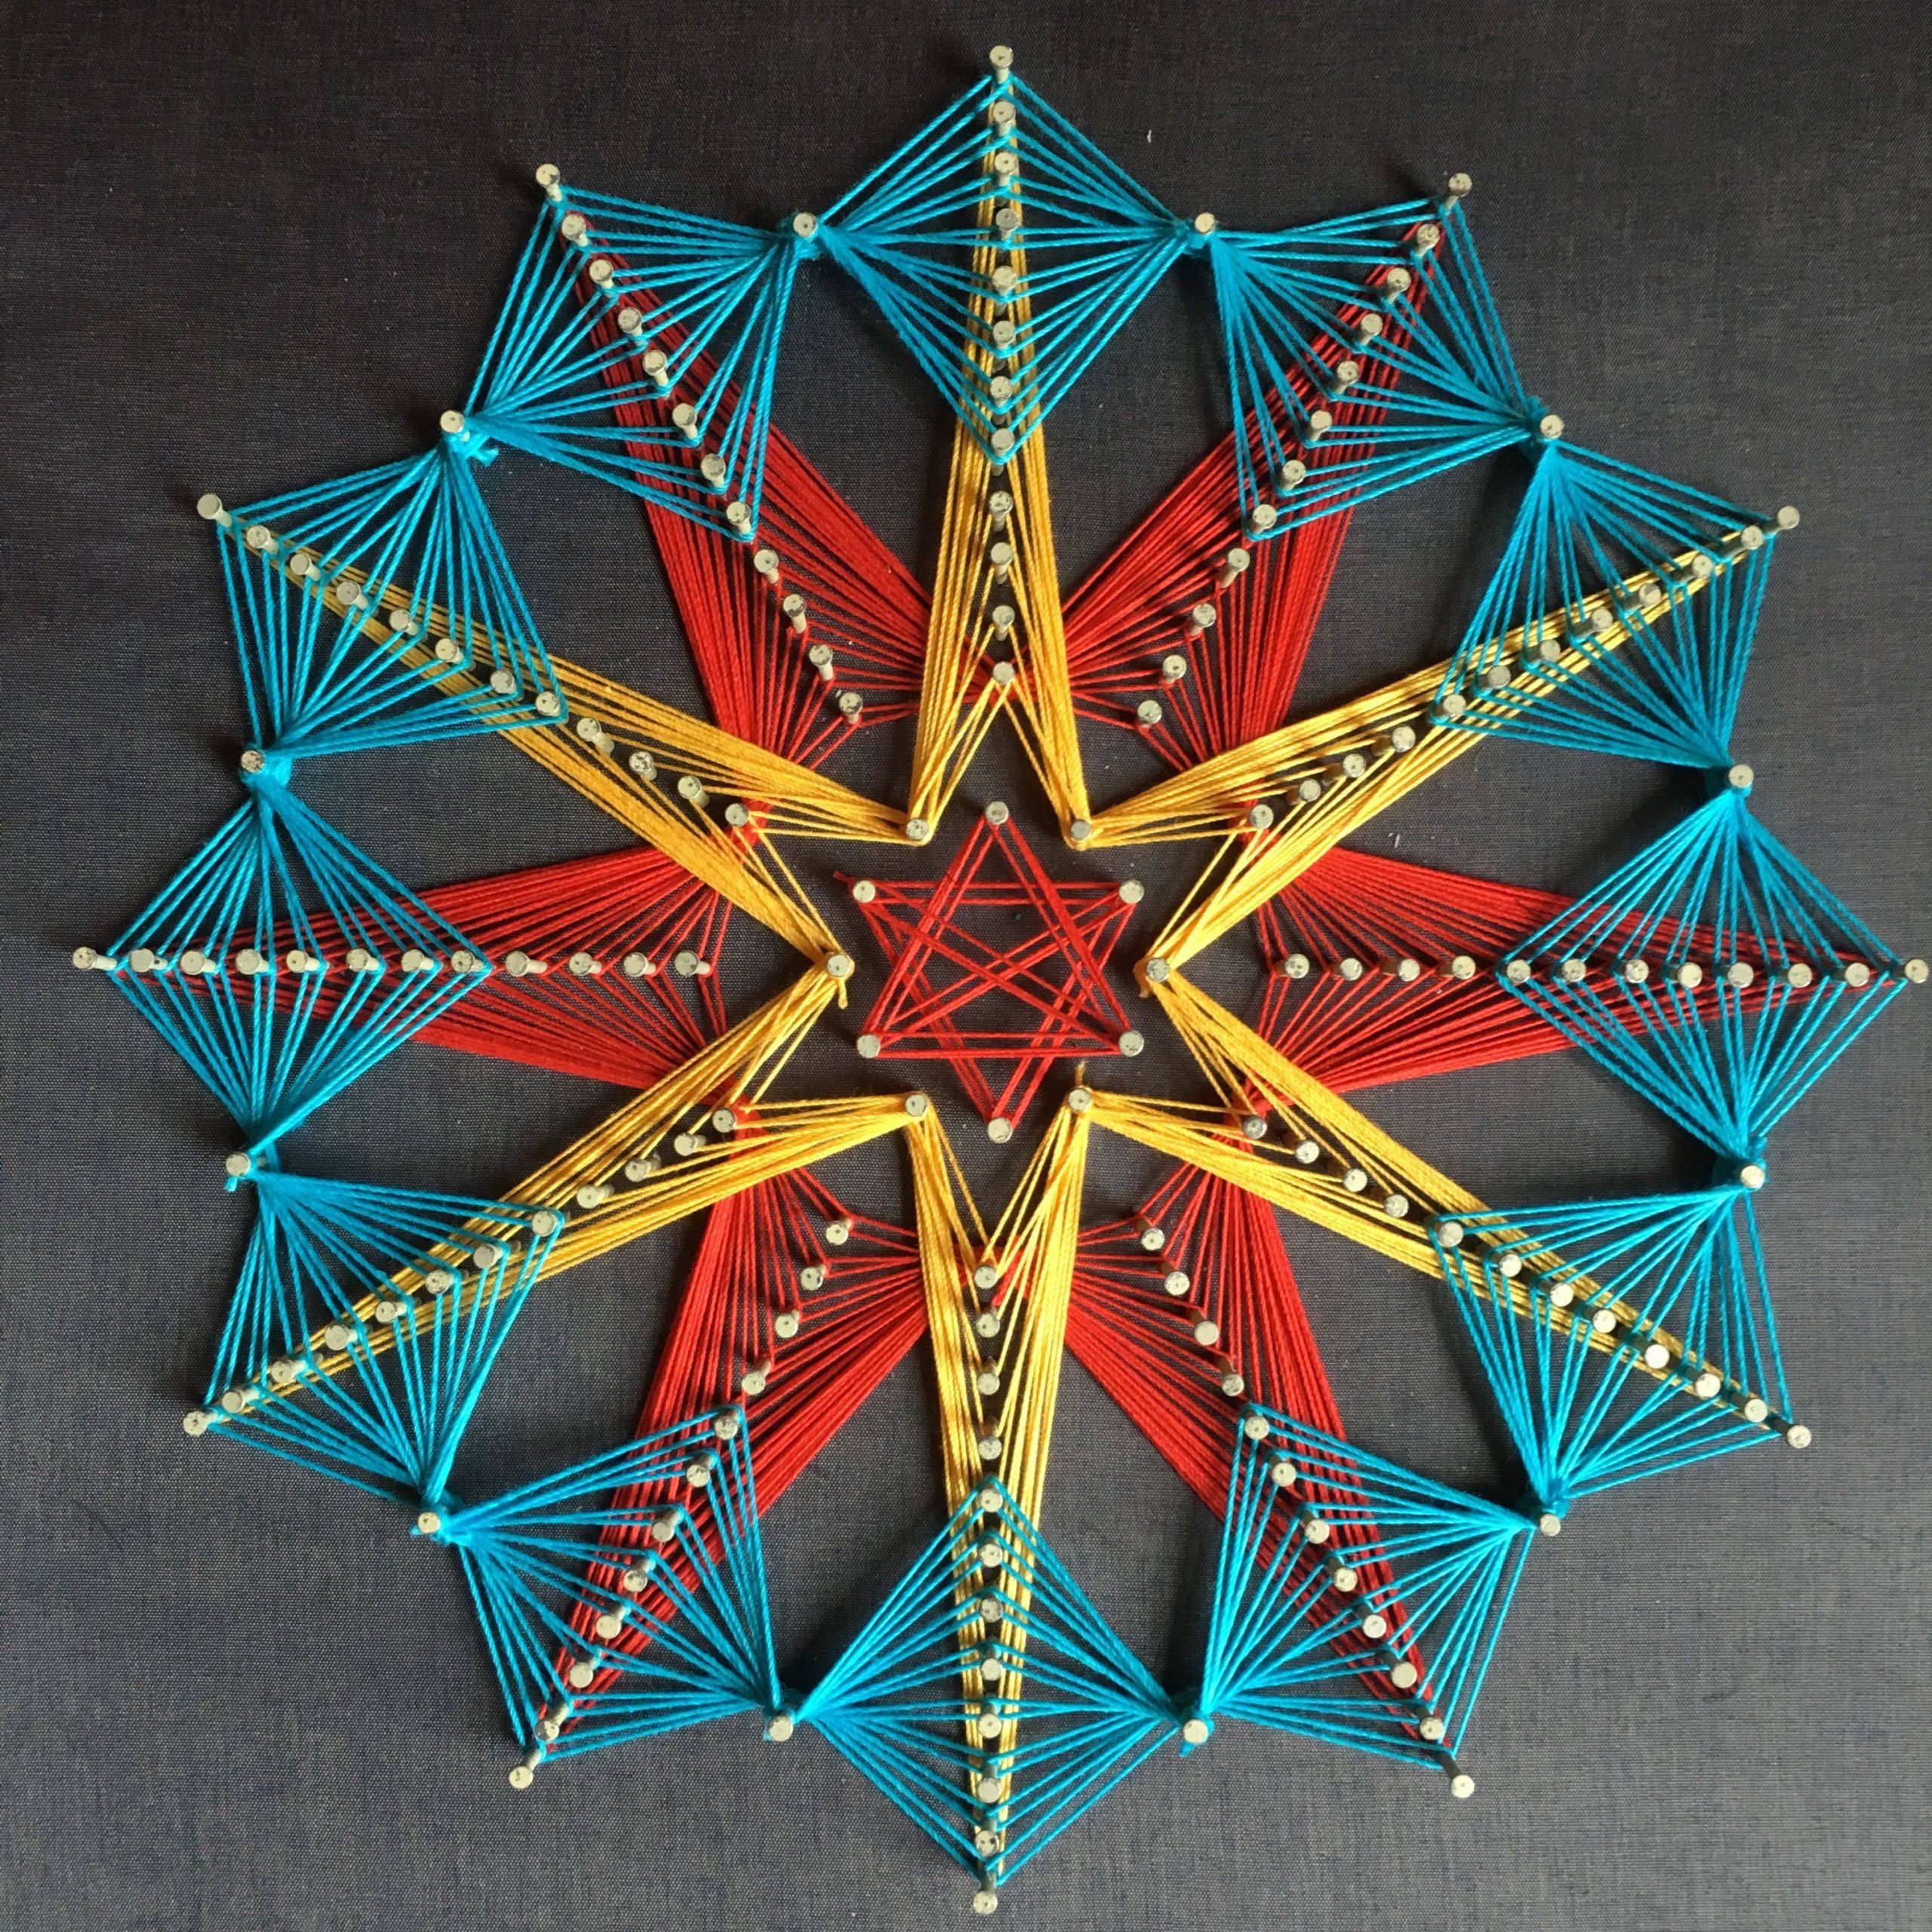 Picturesque Geometric String Art Patterns | Home Design